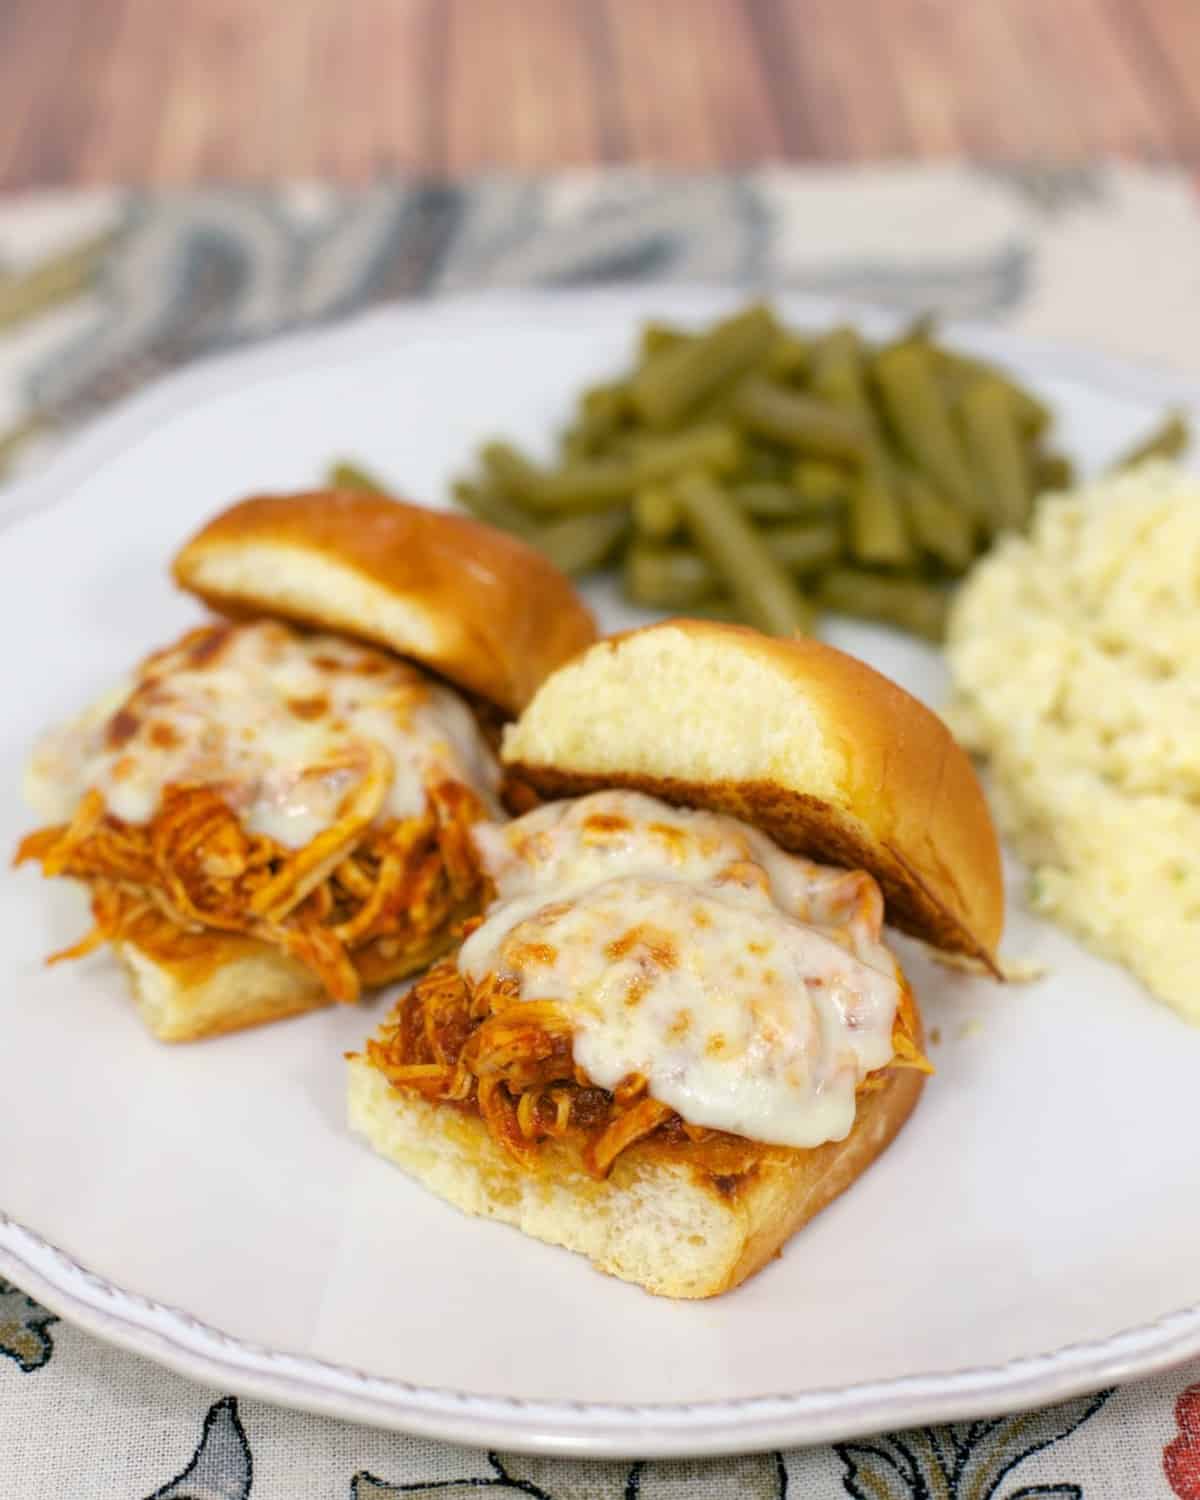 Slow Cooker Chicken Parmesan Sliders - only 3 ingredients for the chicken! Chicken, spaghetti sauce, garlic, mozzarella cheese and buns. Great for an easy weeknight meal or tailgating. Everyone cleaned their plate!!